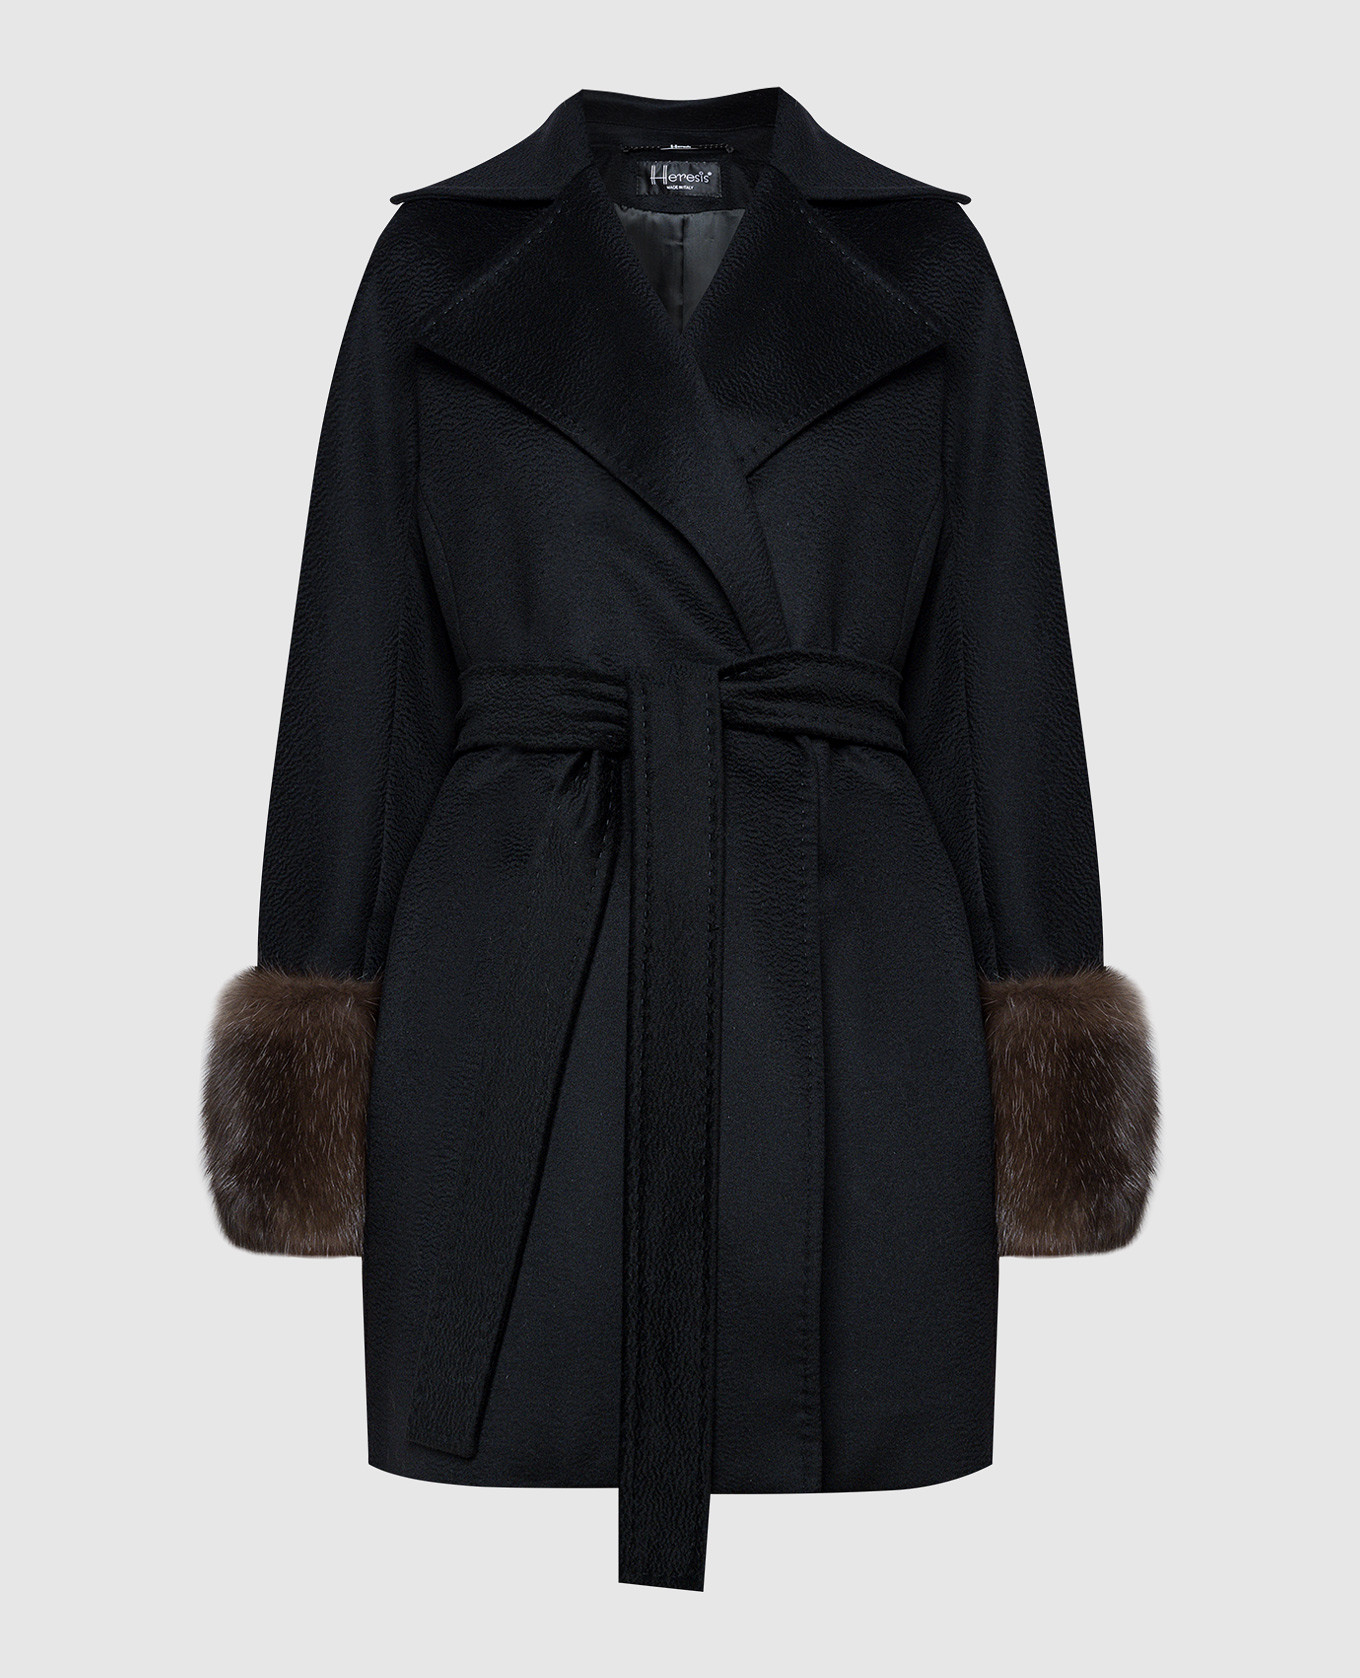 Black short coat with a smell of wool